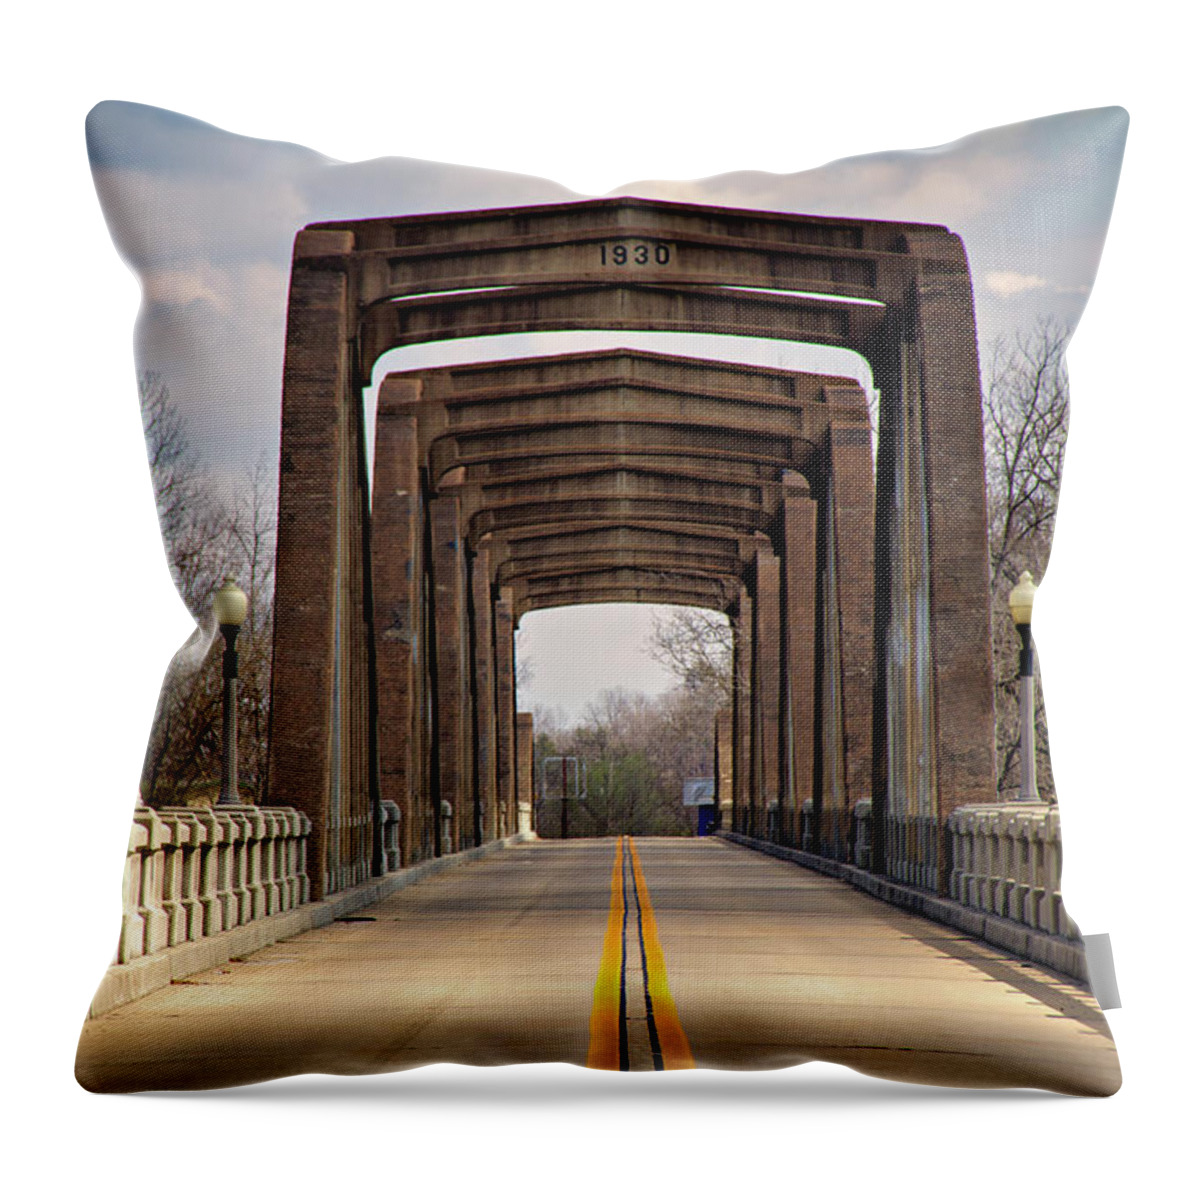 Arch Bridge Throw Pillow featuring the photograph Cotter Bridge by Lana Trussell